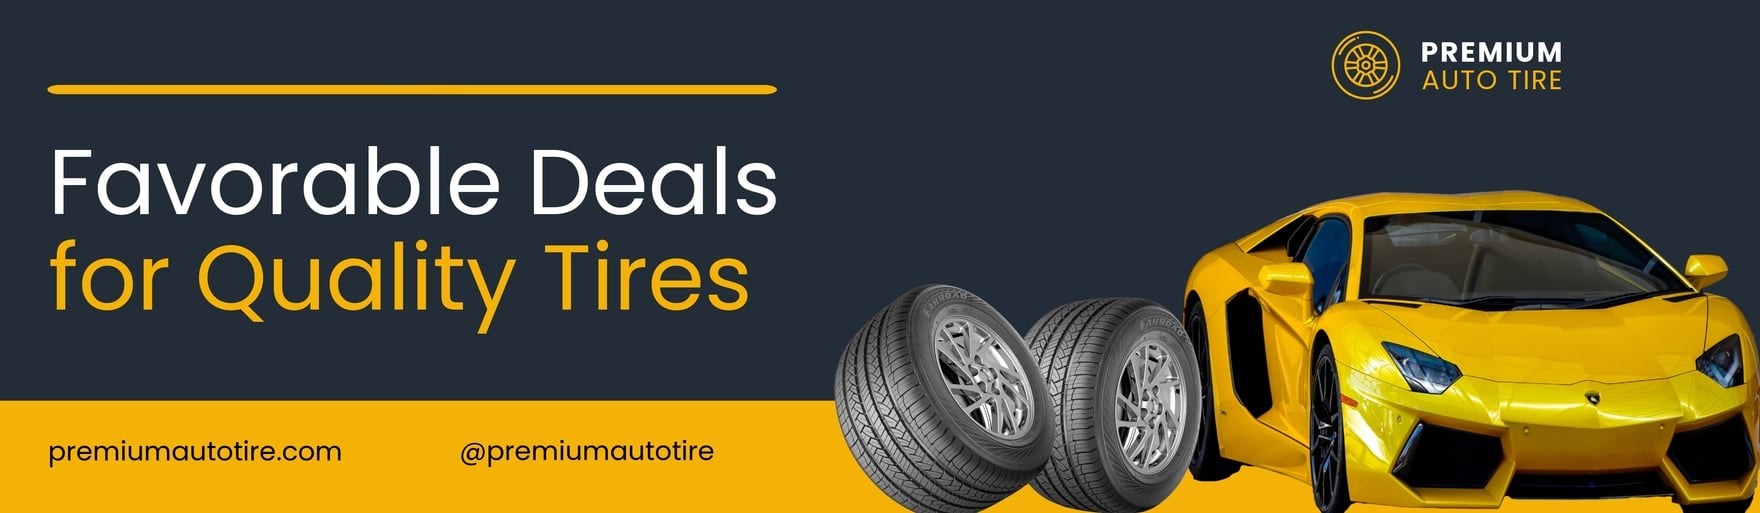 Tire Services Billboard Template in Word, Google Docs, Publisher